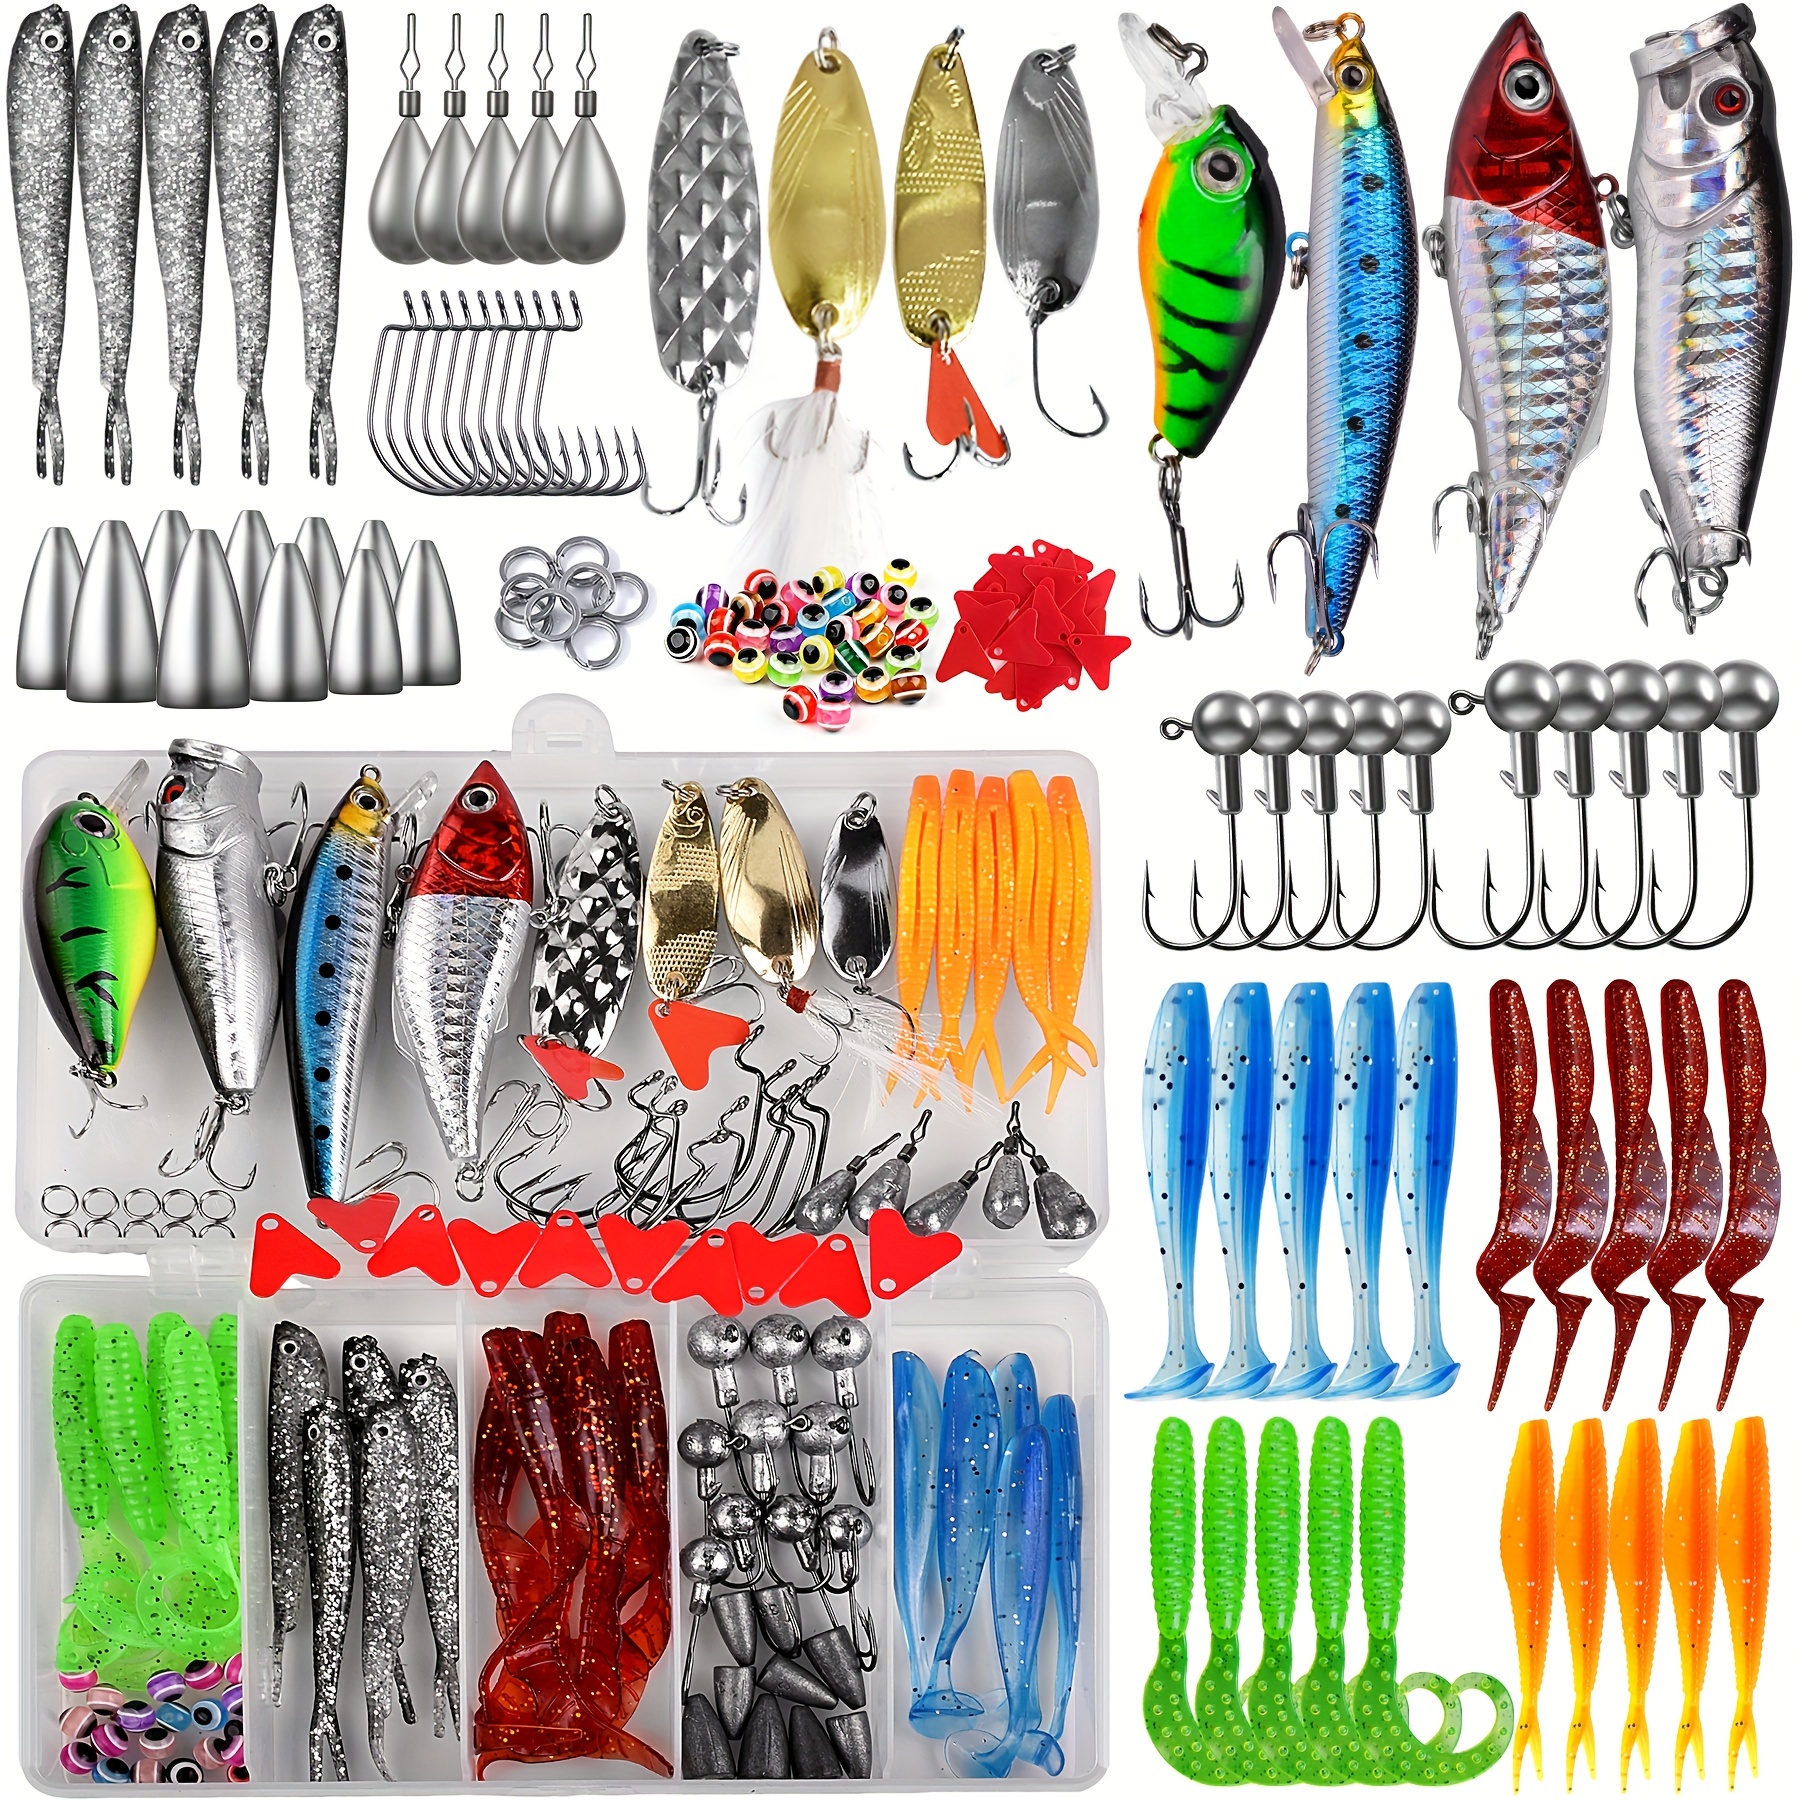 OPQ Fishing Lures Baits Kit Set Tackle Box Including Crankbaits,  Spinnerbaits,Jig Hooks, Plastic Worms,Topwater Lures for Trout Bass Salmon